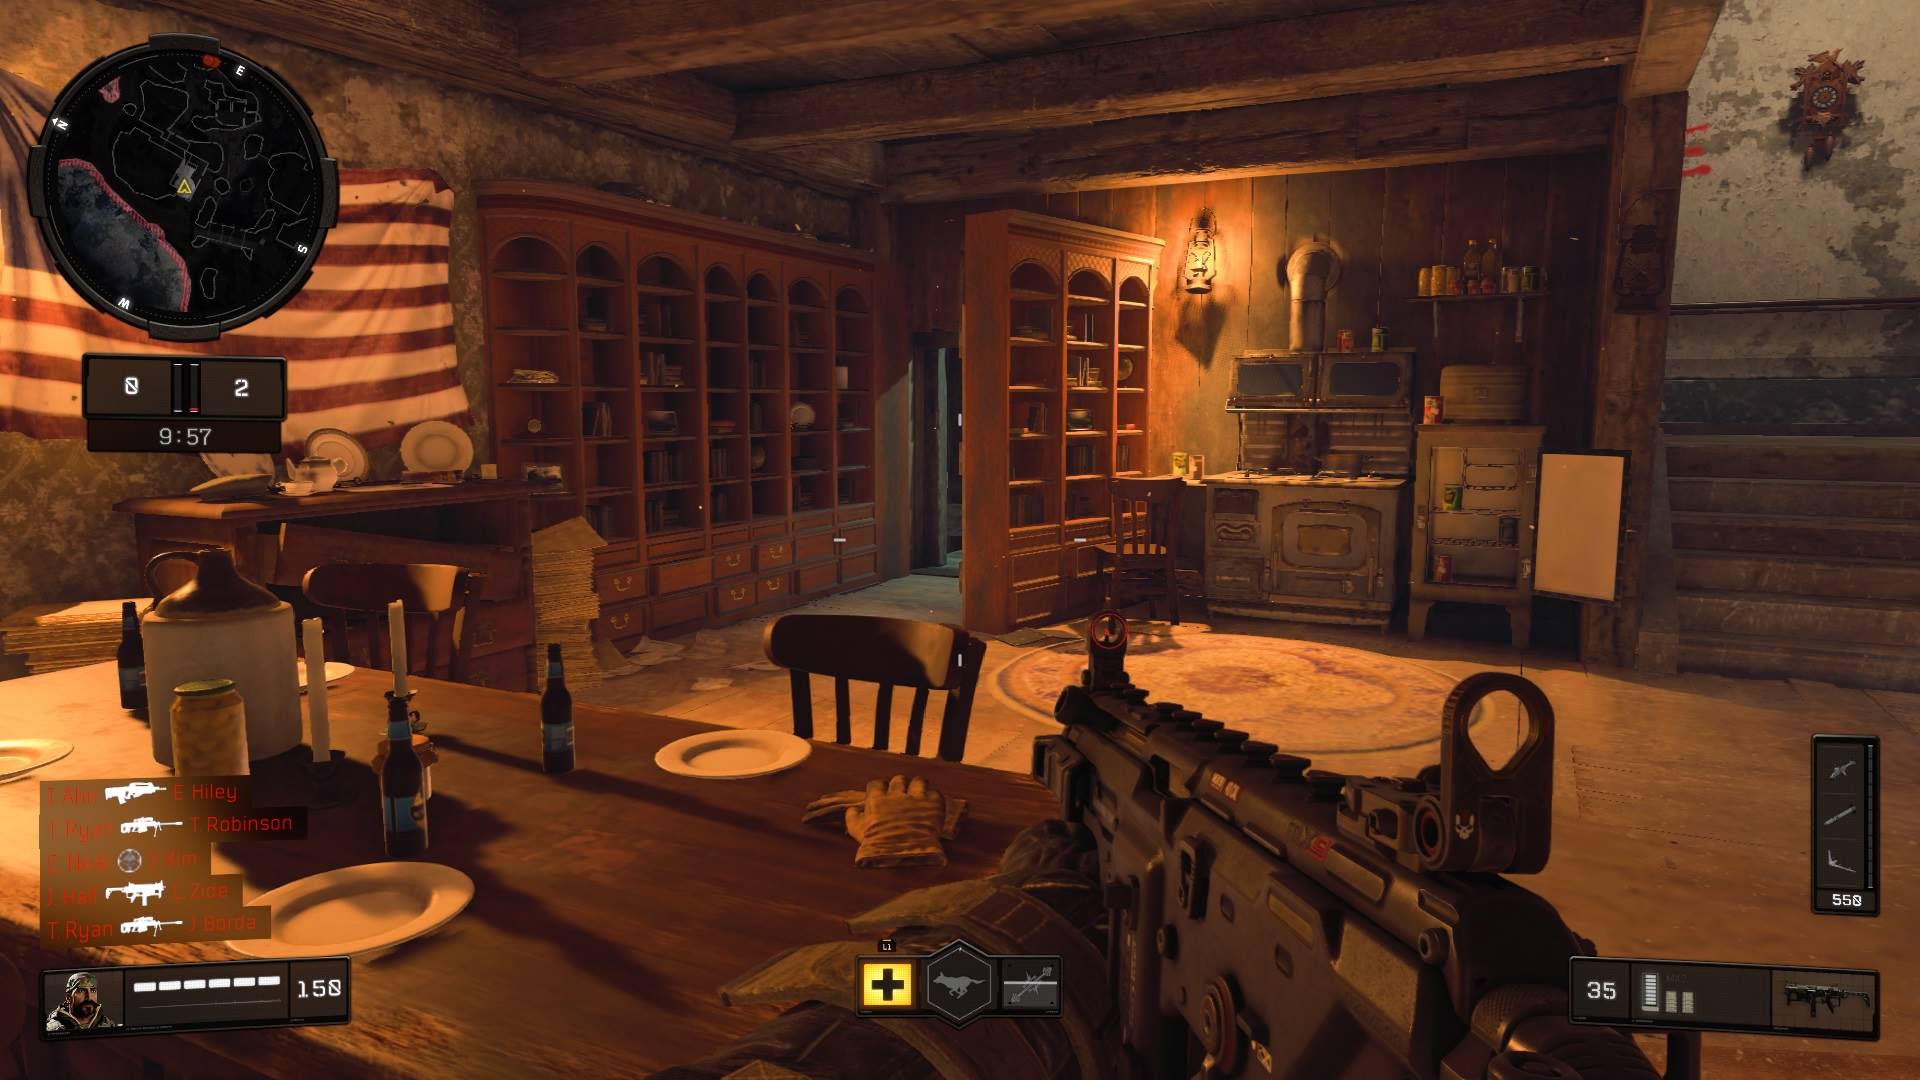 Call of Duty: Black Ops 4 map "Militia" has a pair of cabins that you should get to know.